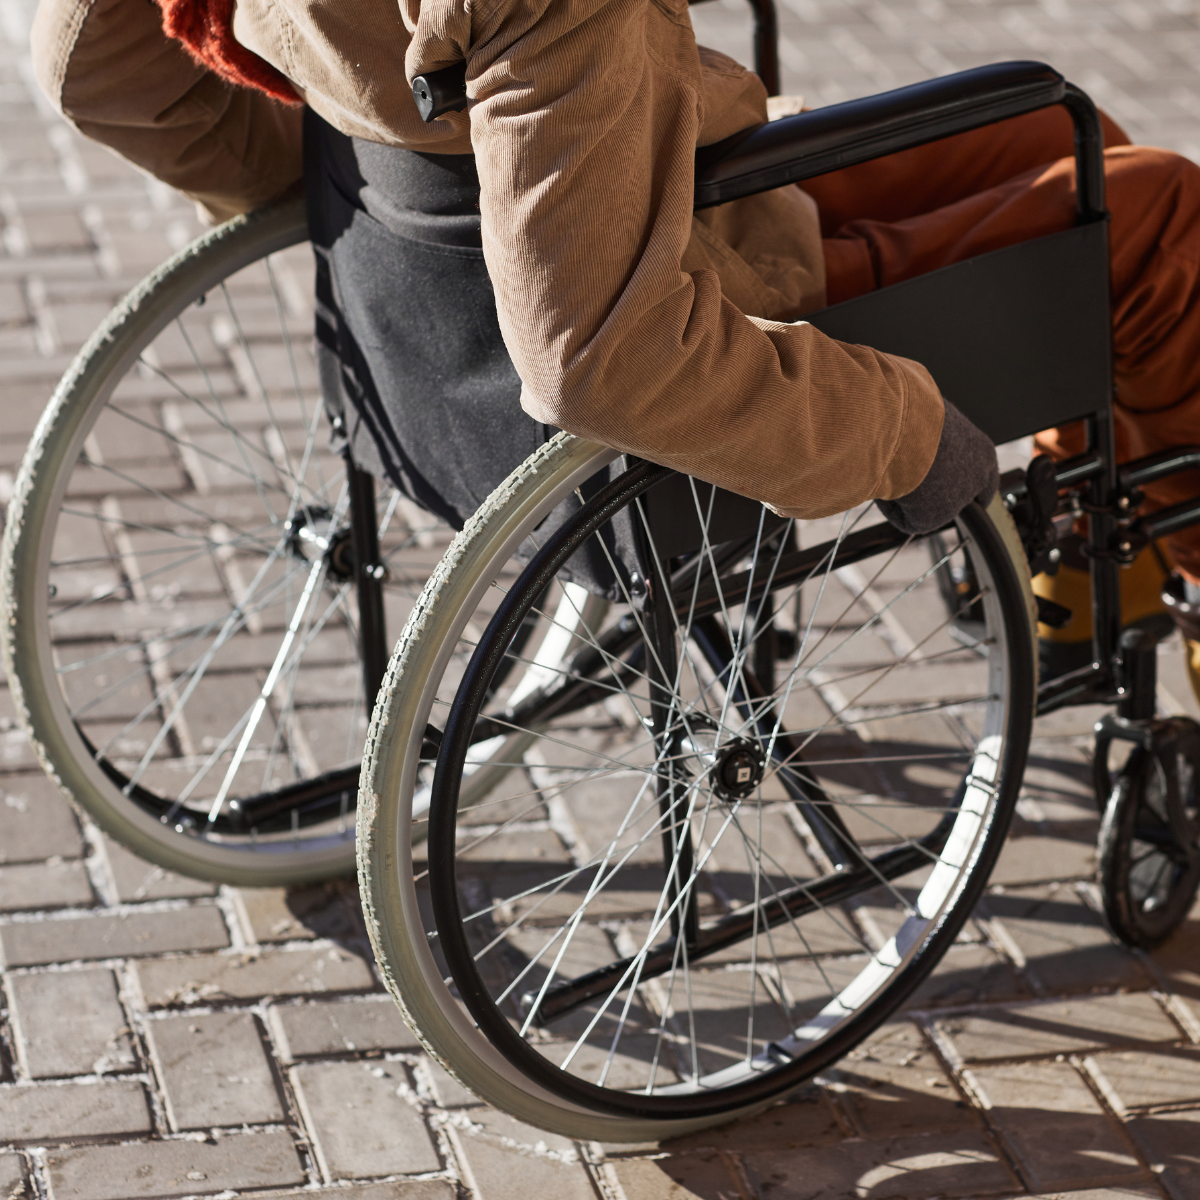 Wheelchair user facing away from camera, on the pavement. Head and shoulder are cropped out of photo